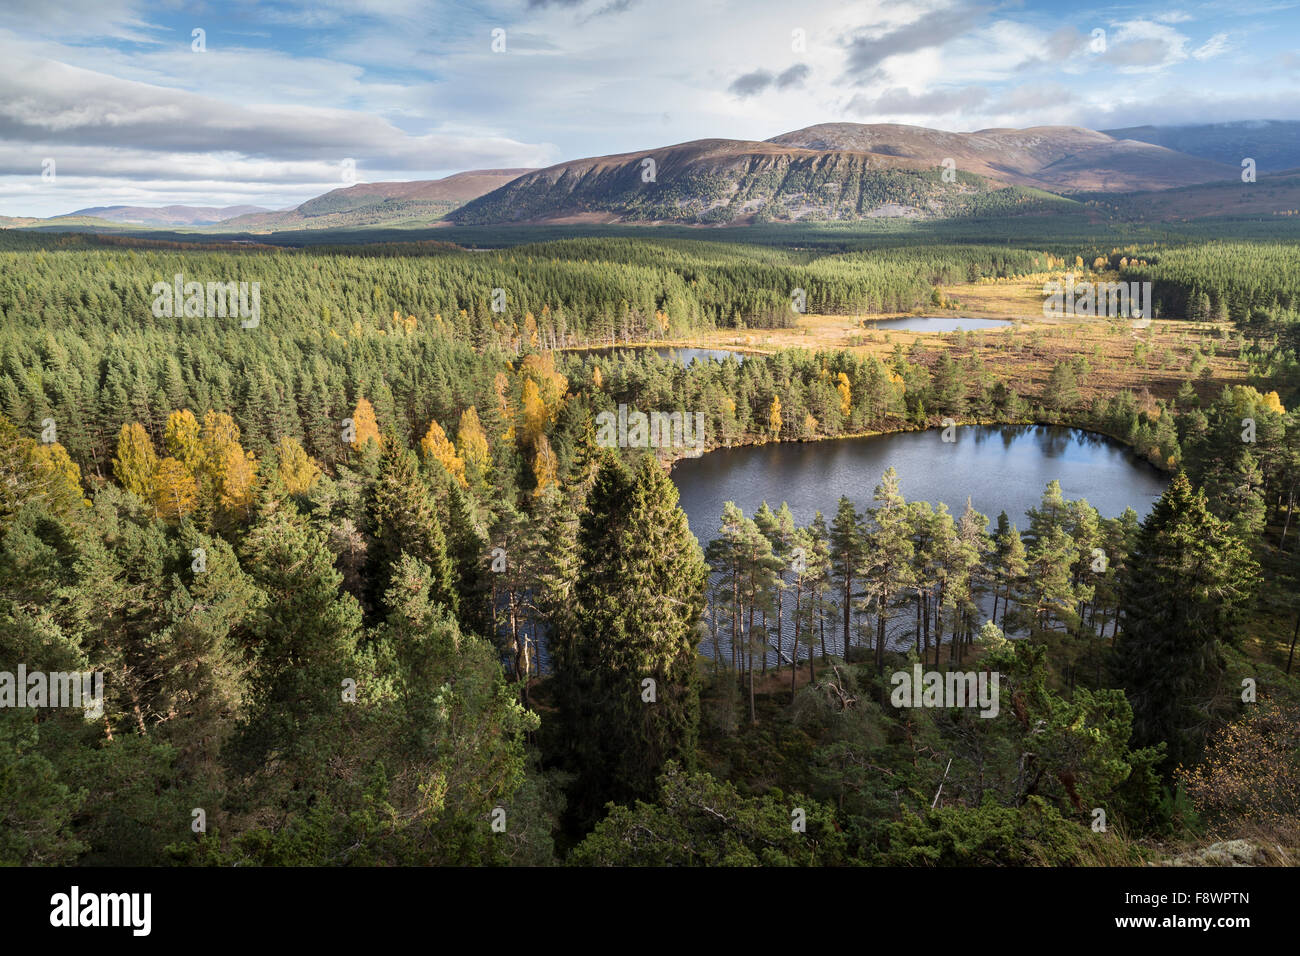 Uath Lochans in the Cairngorms. Stock Photo